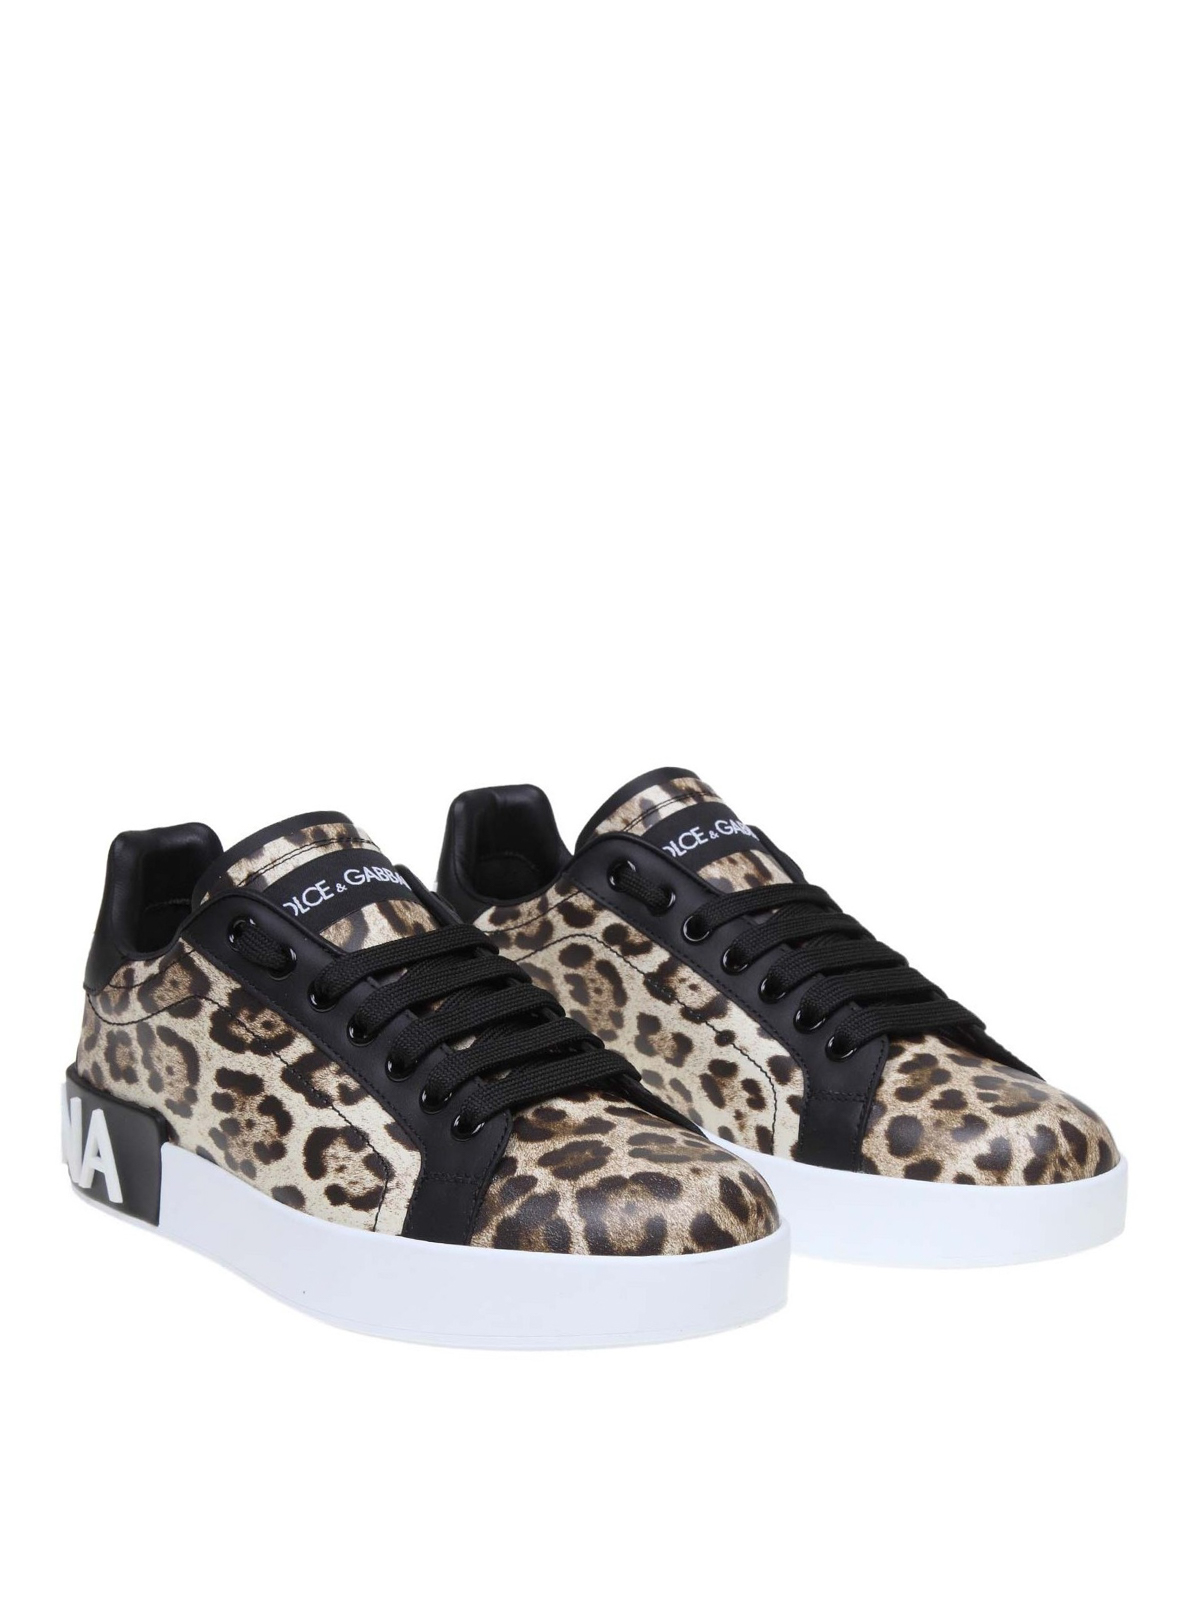 dolce and gabbana leopard shoes